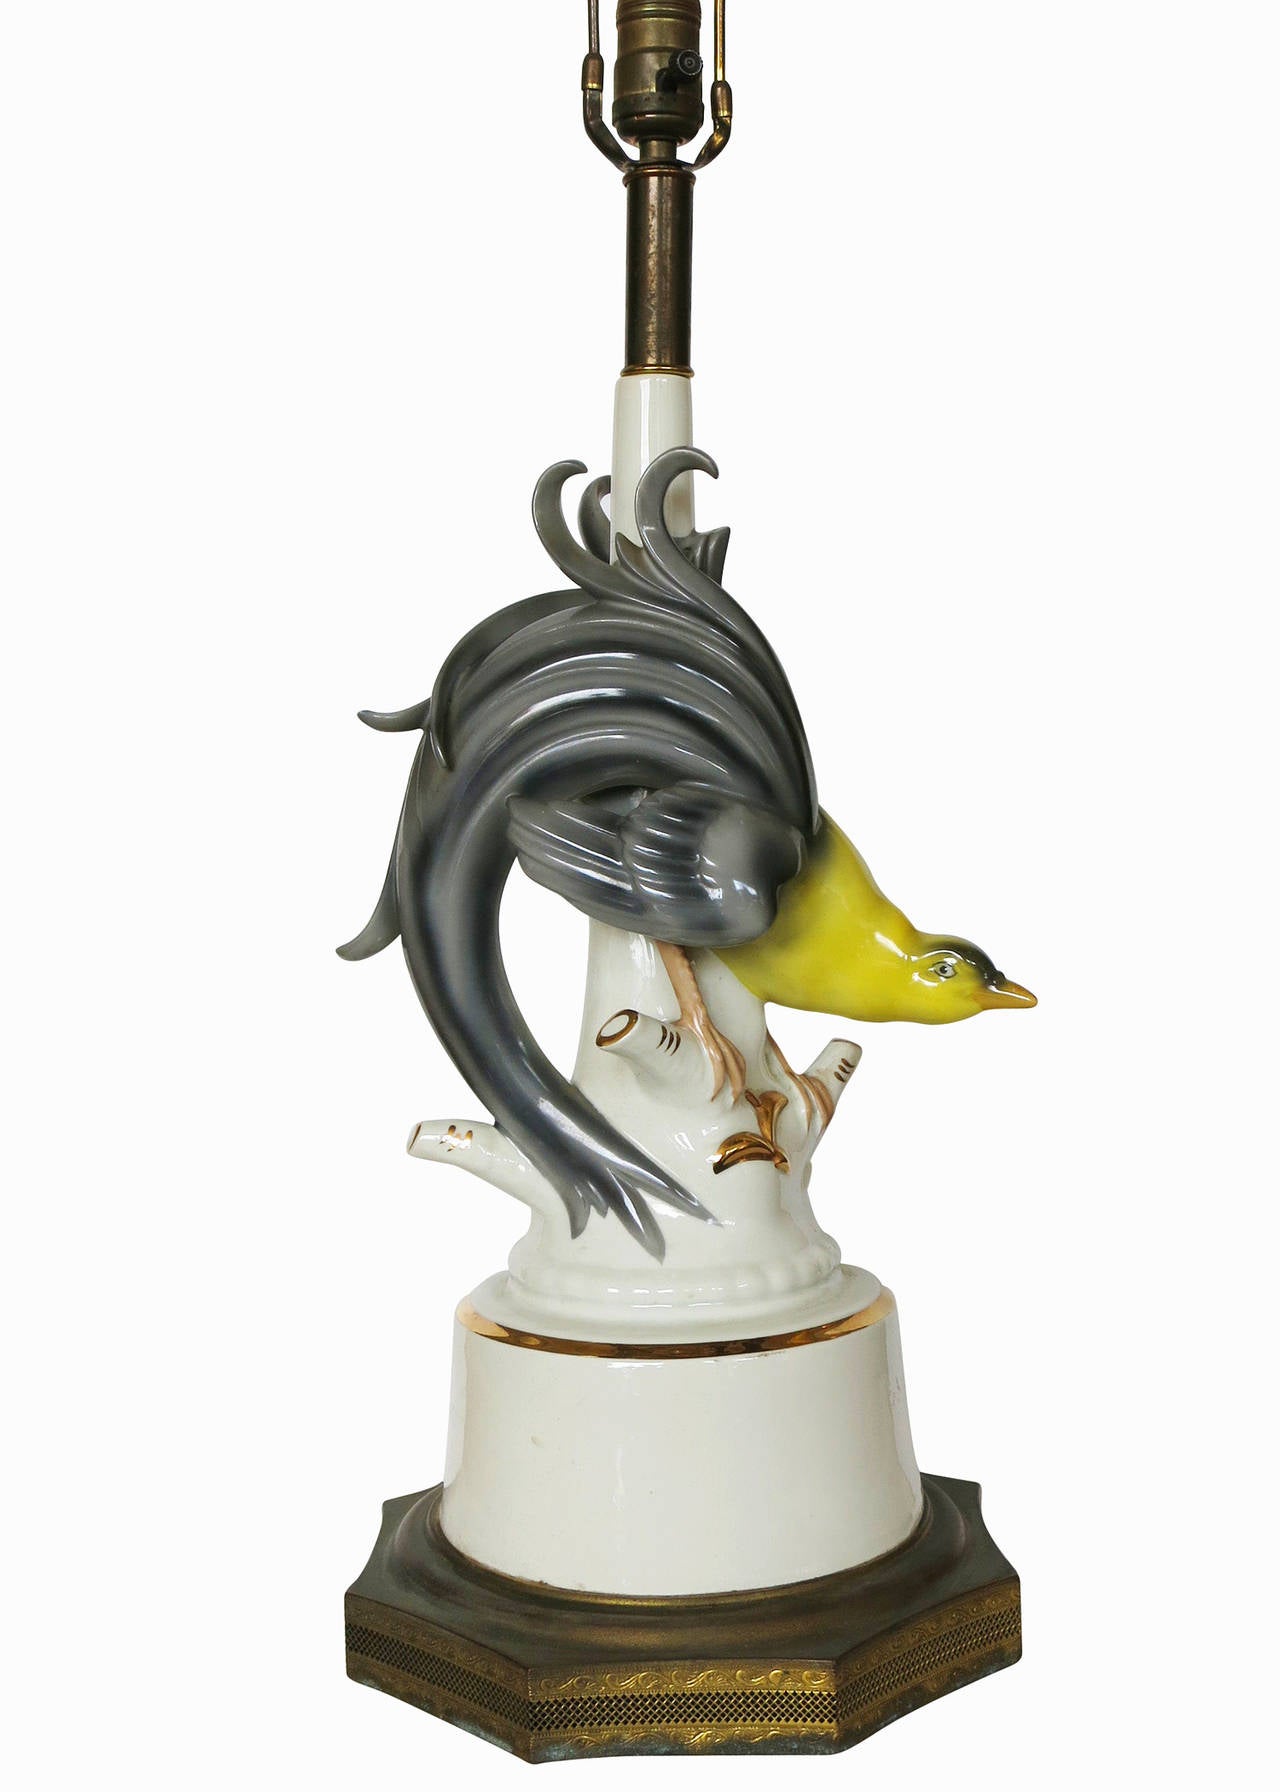 Made circa 1950, this ceramic lamp pair was modeled after blue and yellow greater Bird of Paradise. The birds are perched atop white, ceramic tree branches with gold detail that rest on decorative gilded brass bases.